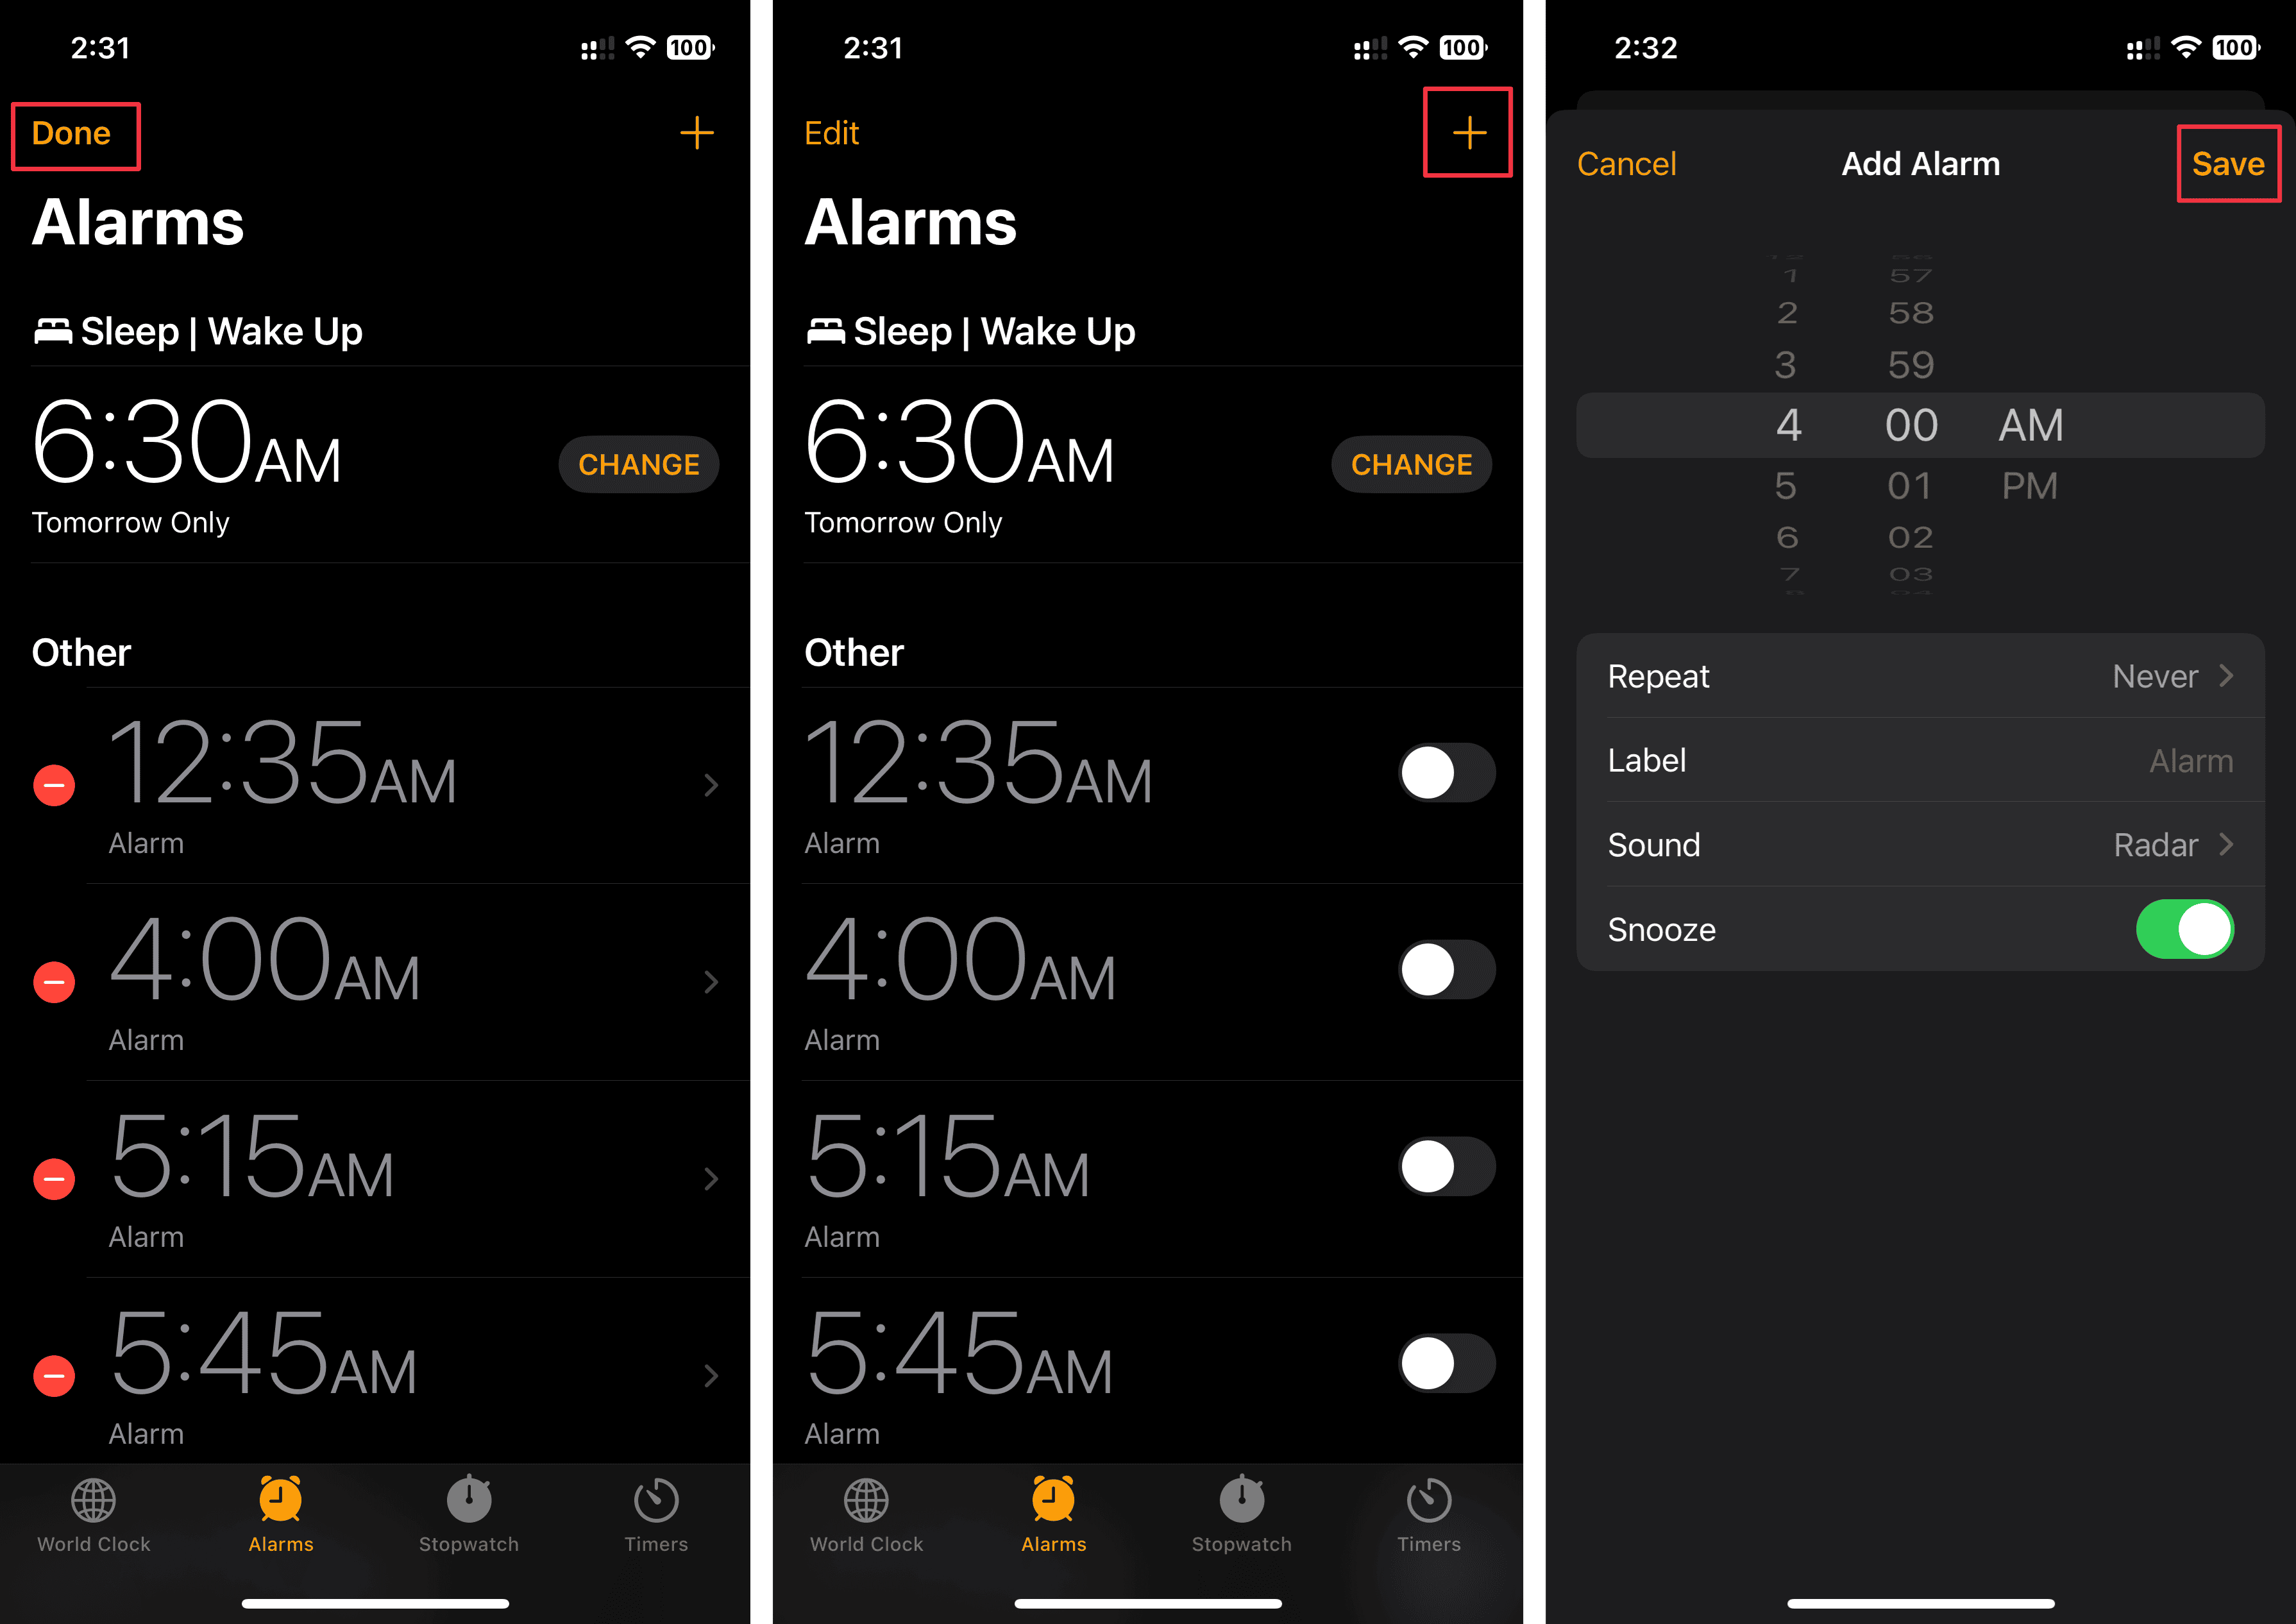 Tap Done and adding New Alarm